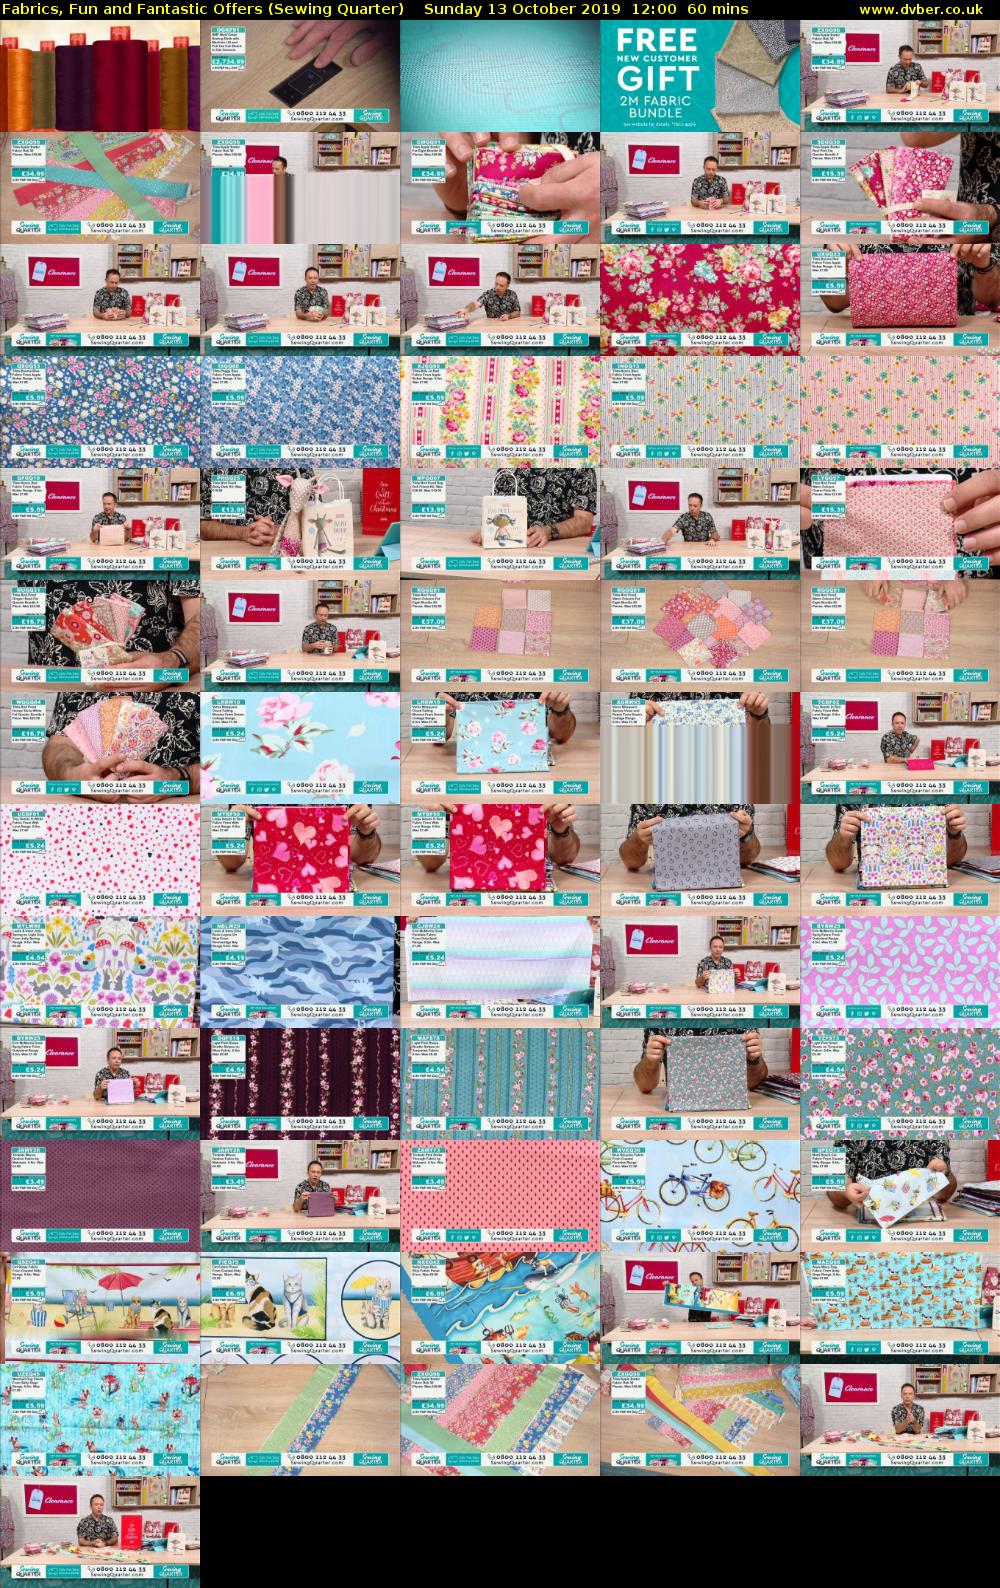 Fabrics, Fun and Fantastic Offers (Sewing Quarter) Sunday 13 October 2019 12:00 - 13:00